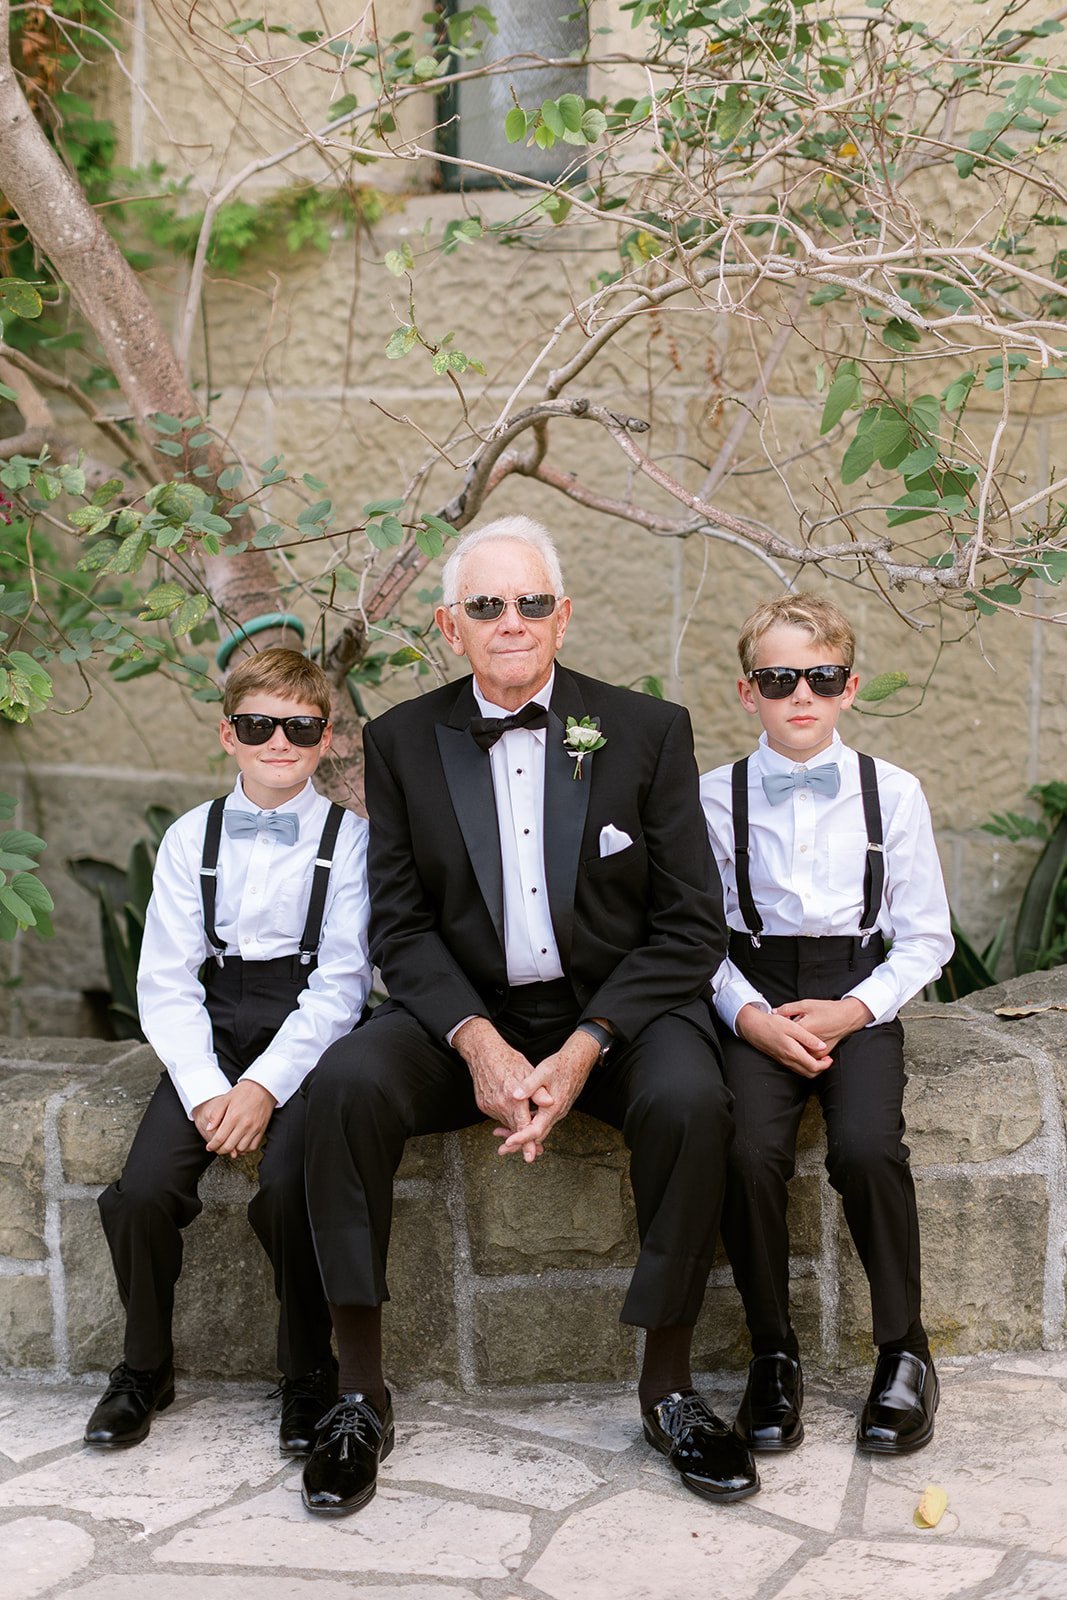 www.santabarbarawedding.com | Santa Barbara Courthouse | Amazing Days Events | Anna Delores Photography | Anna Le Pley Taylor | Father of the Bride and Ring Bearers Wearing Sunglasses